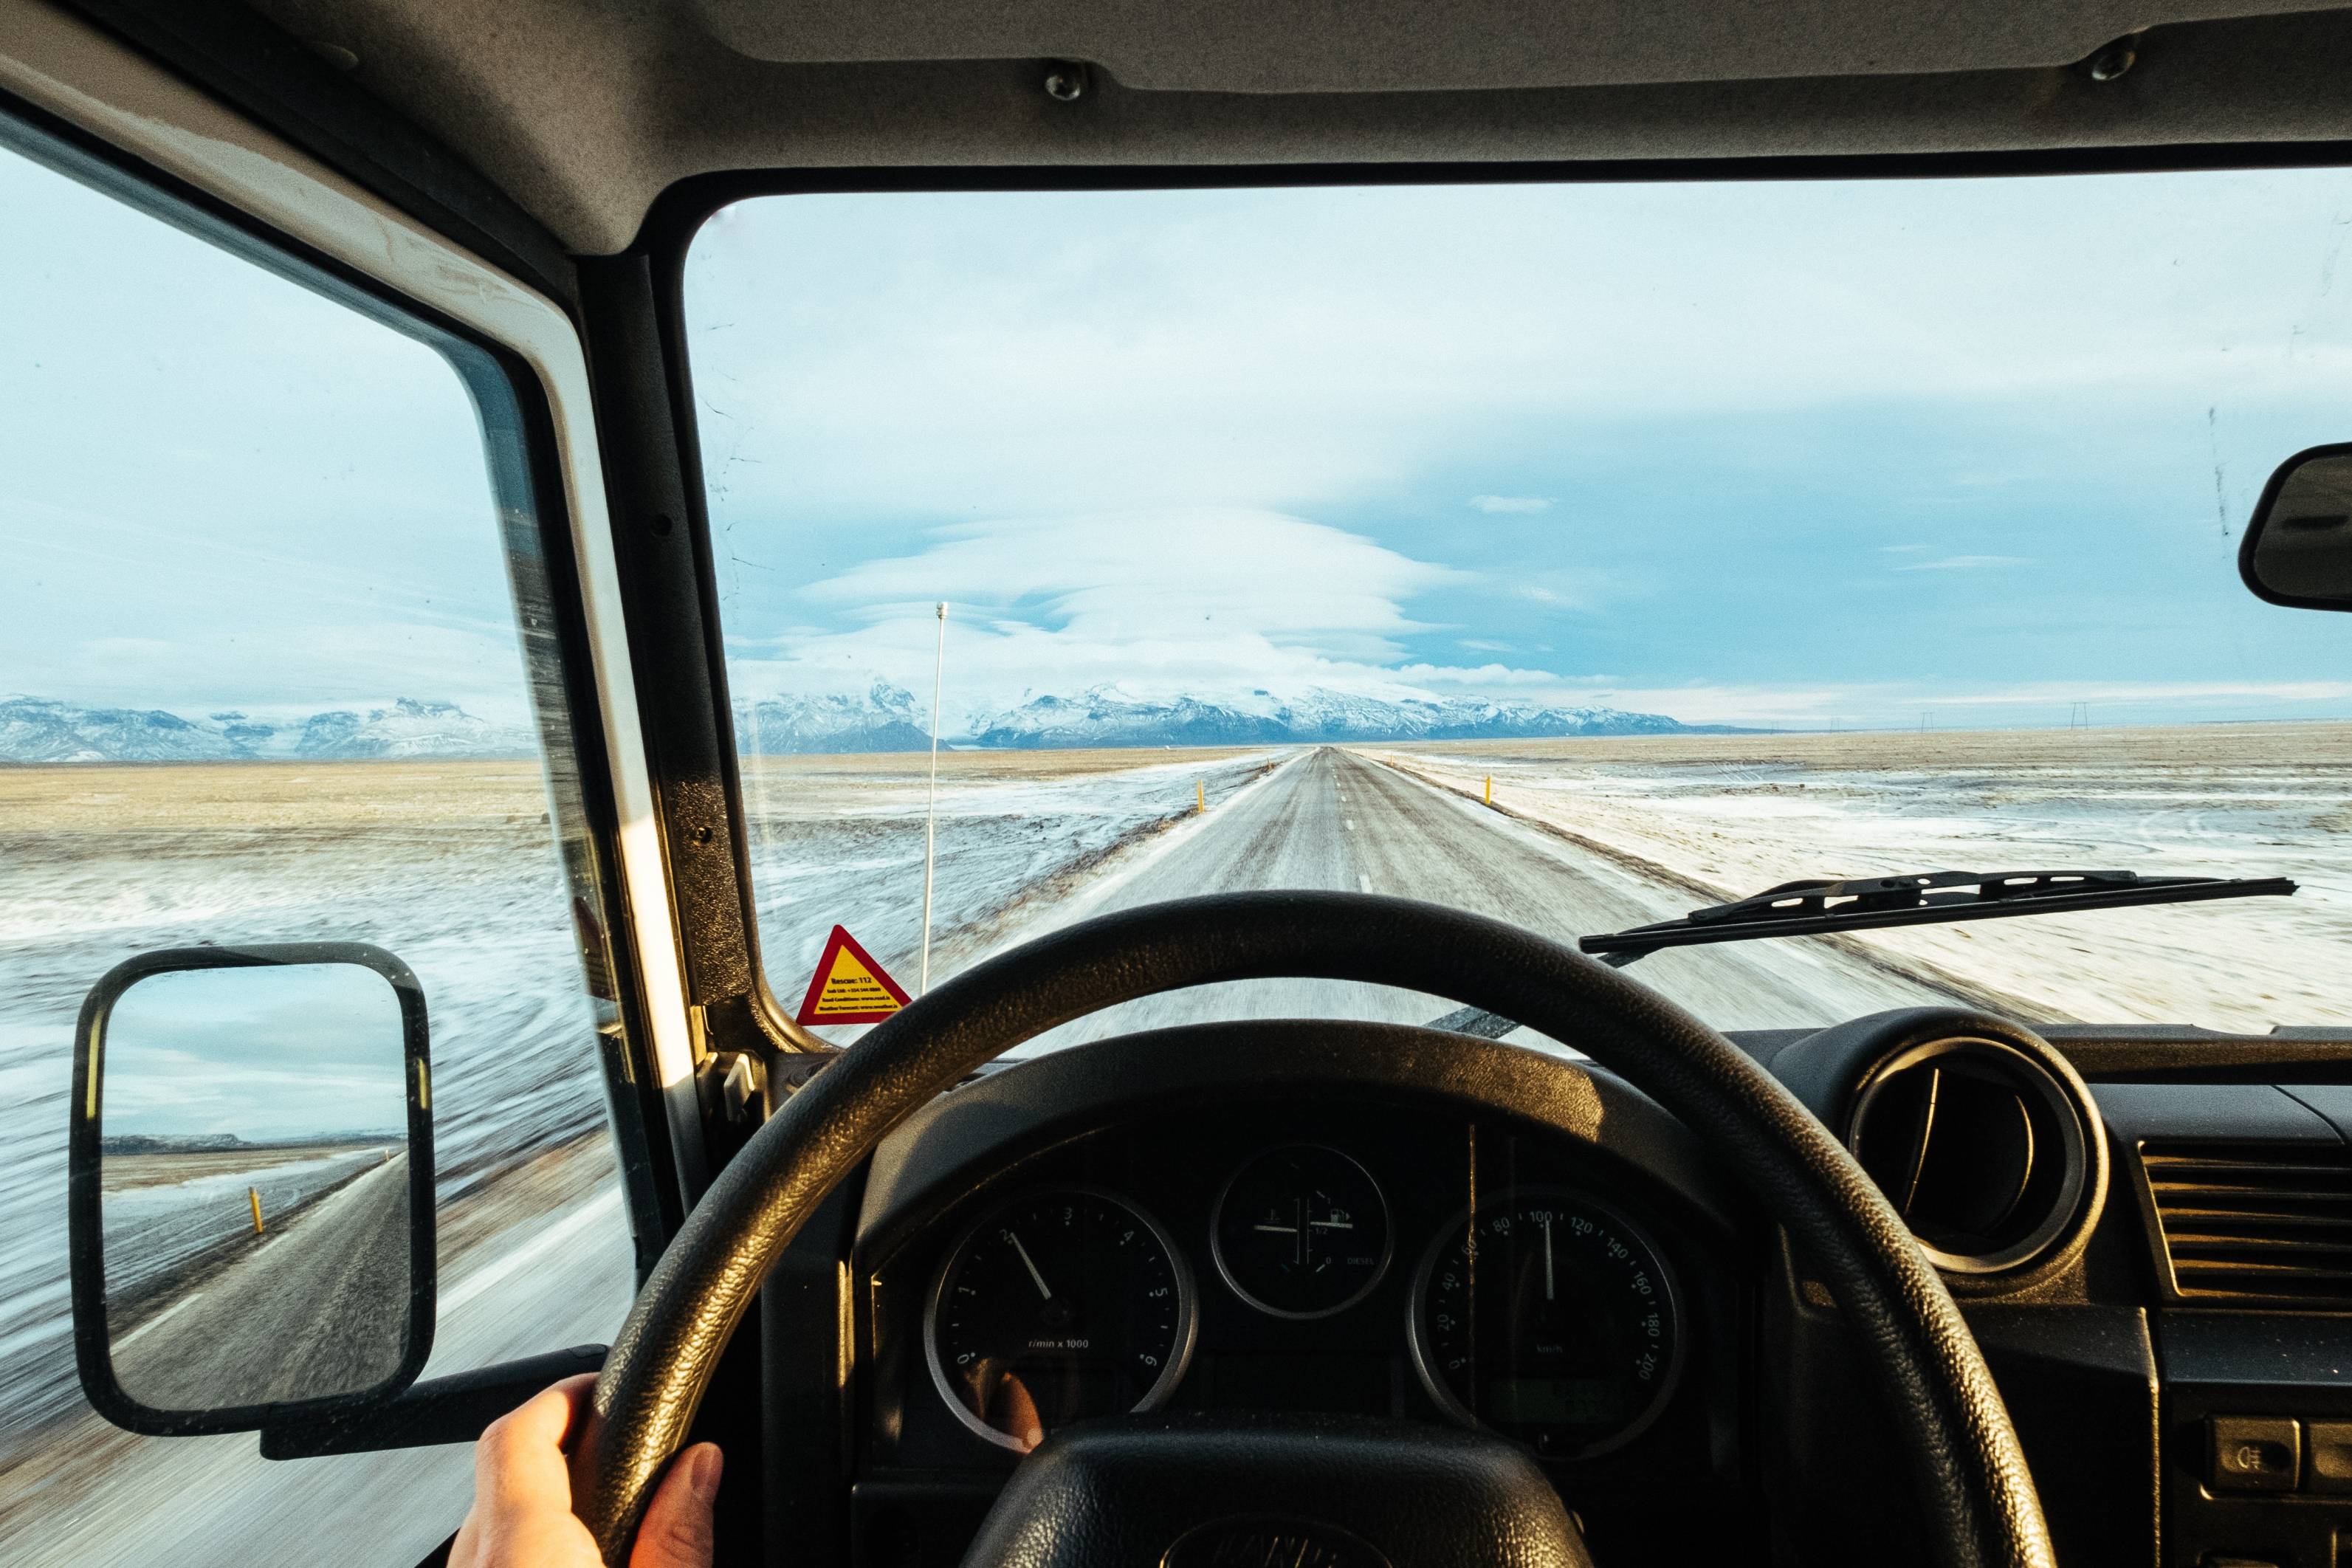 winter-in-iceland-from-inside-the-vehicle-on-a-bright-winter-day-light-snow-coverage-on-road-an-surroundings-with-mountain-in-background